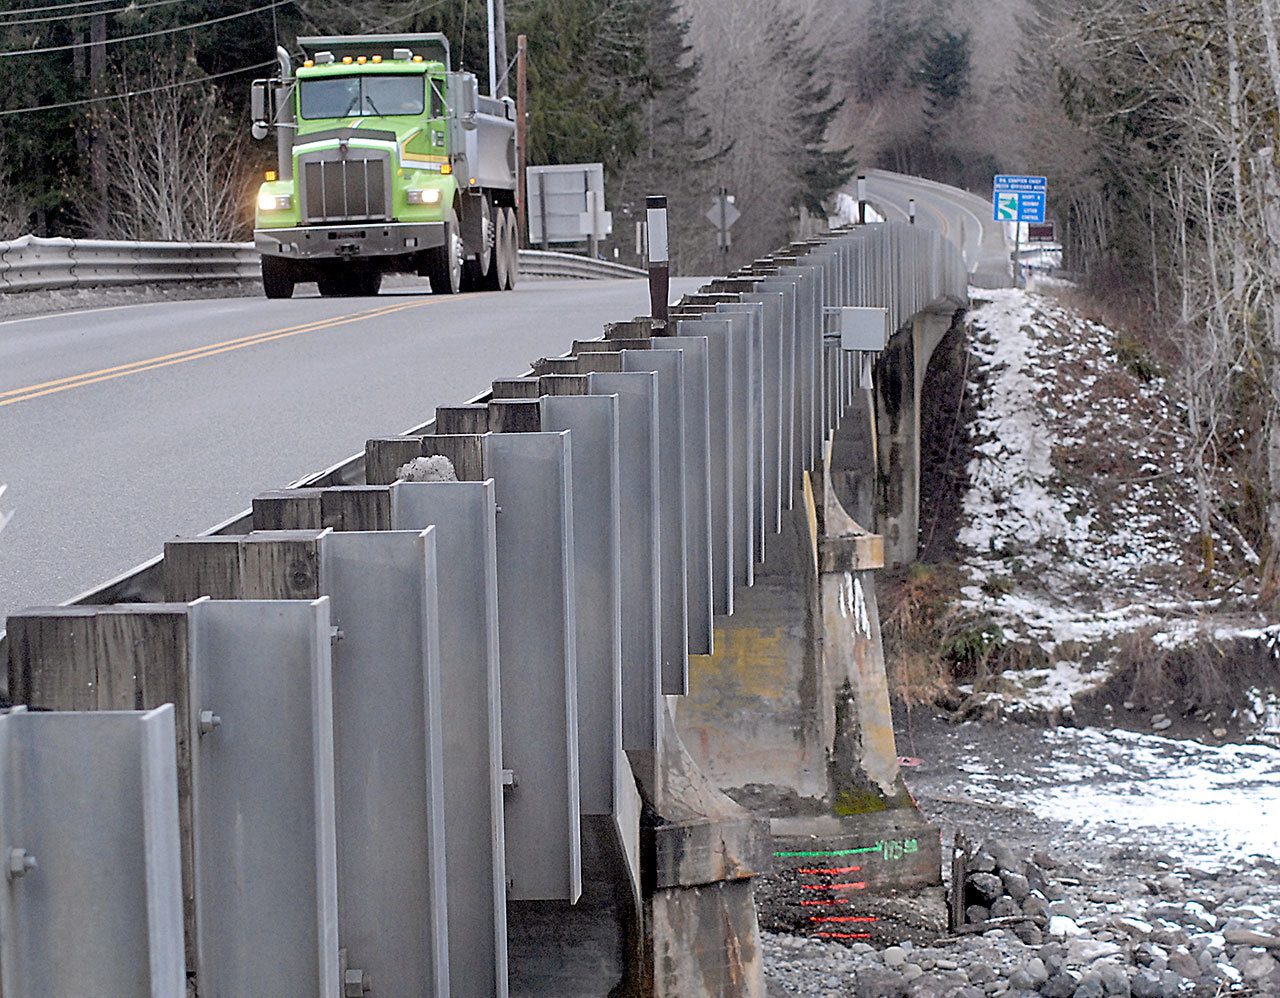 A dump truck crosses the Elwha River bridge Wednesday as markings on a bridge pier show the amount of scouring and erosion caused by the river. (Keith Thorpe/Peninsula Daily News)